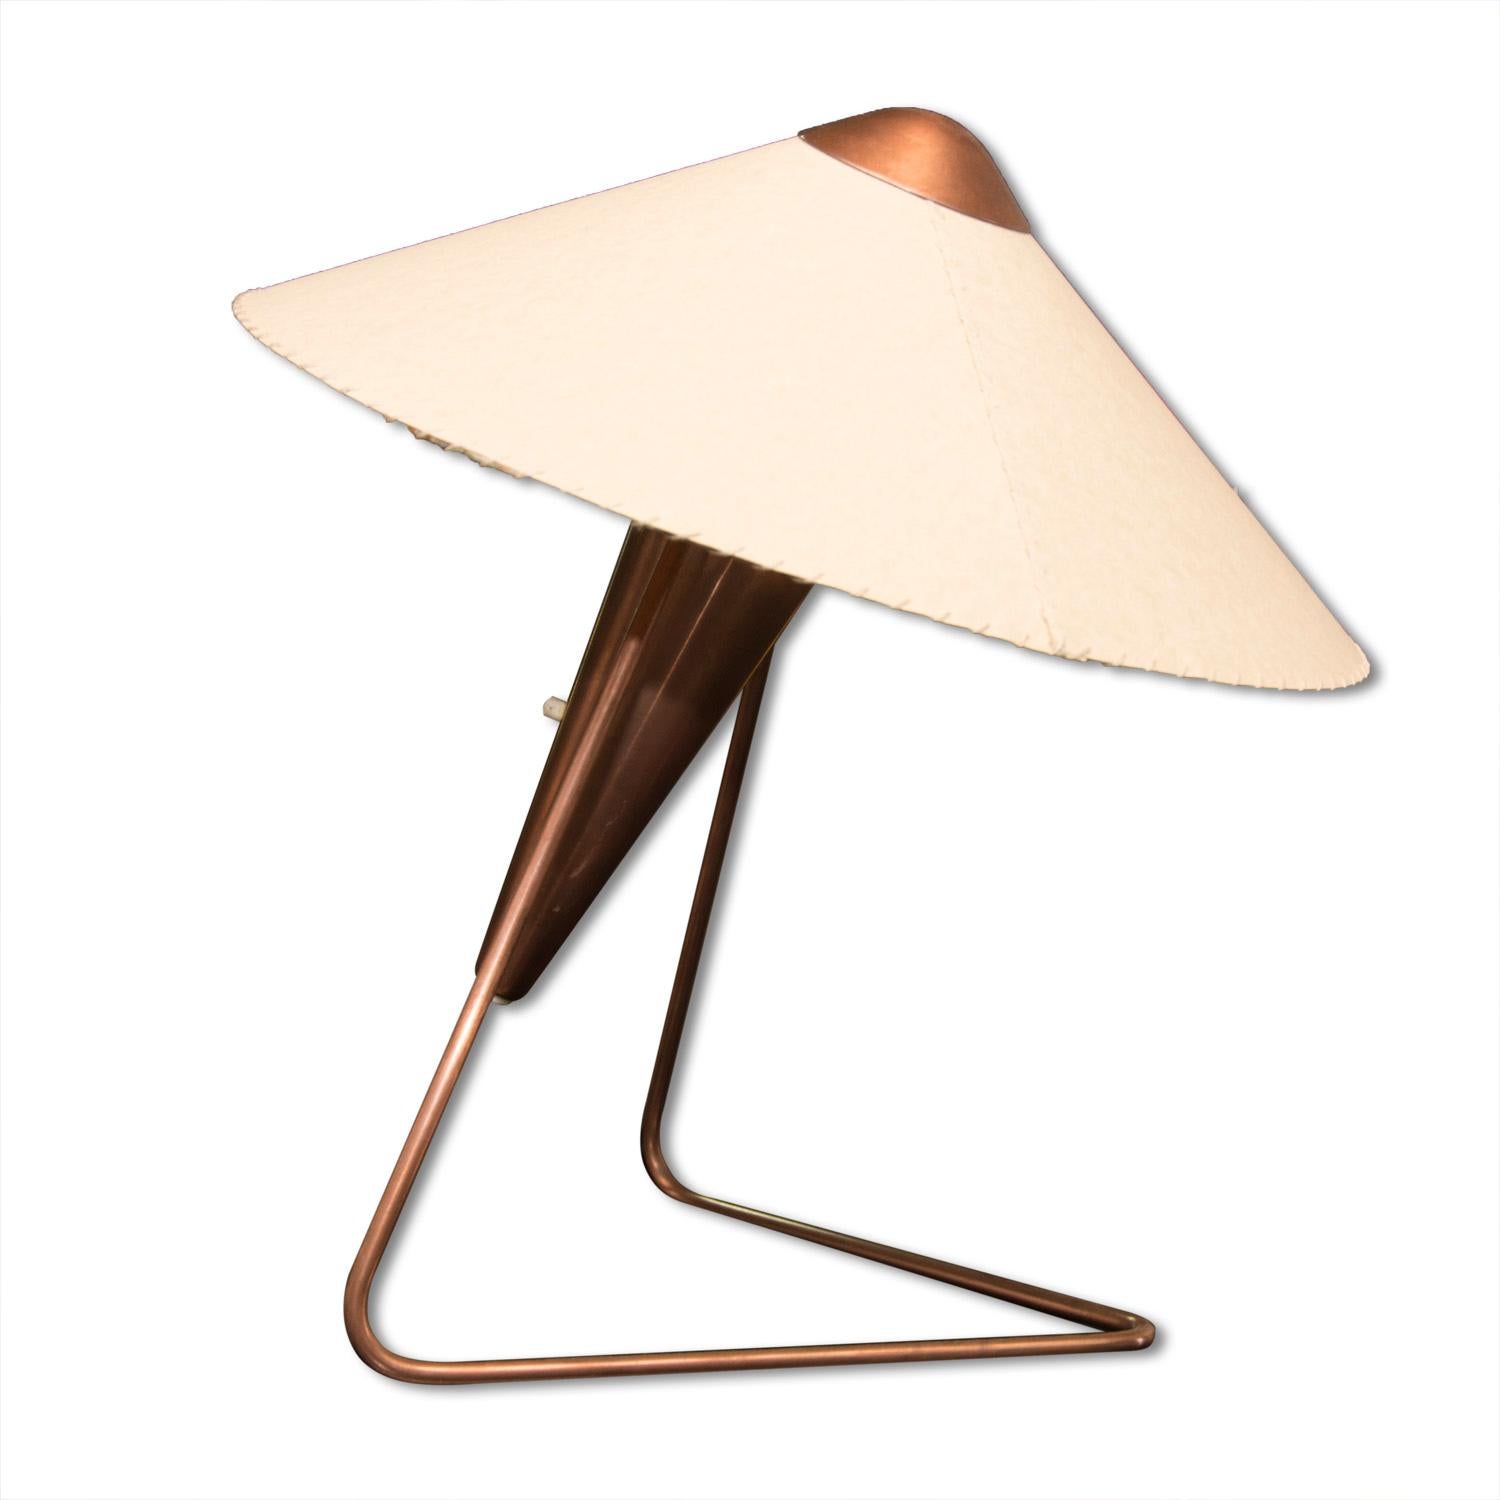 This brass copper-plated table or wall lamp was made in the 1950s in the former Czechoslovakia. It was designed by Helena Frantovat for Okolo company. It features a torch shaped design. This is a typical example of the modernist creation in